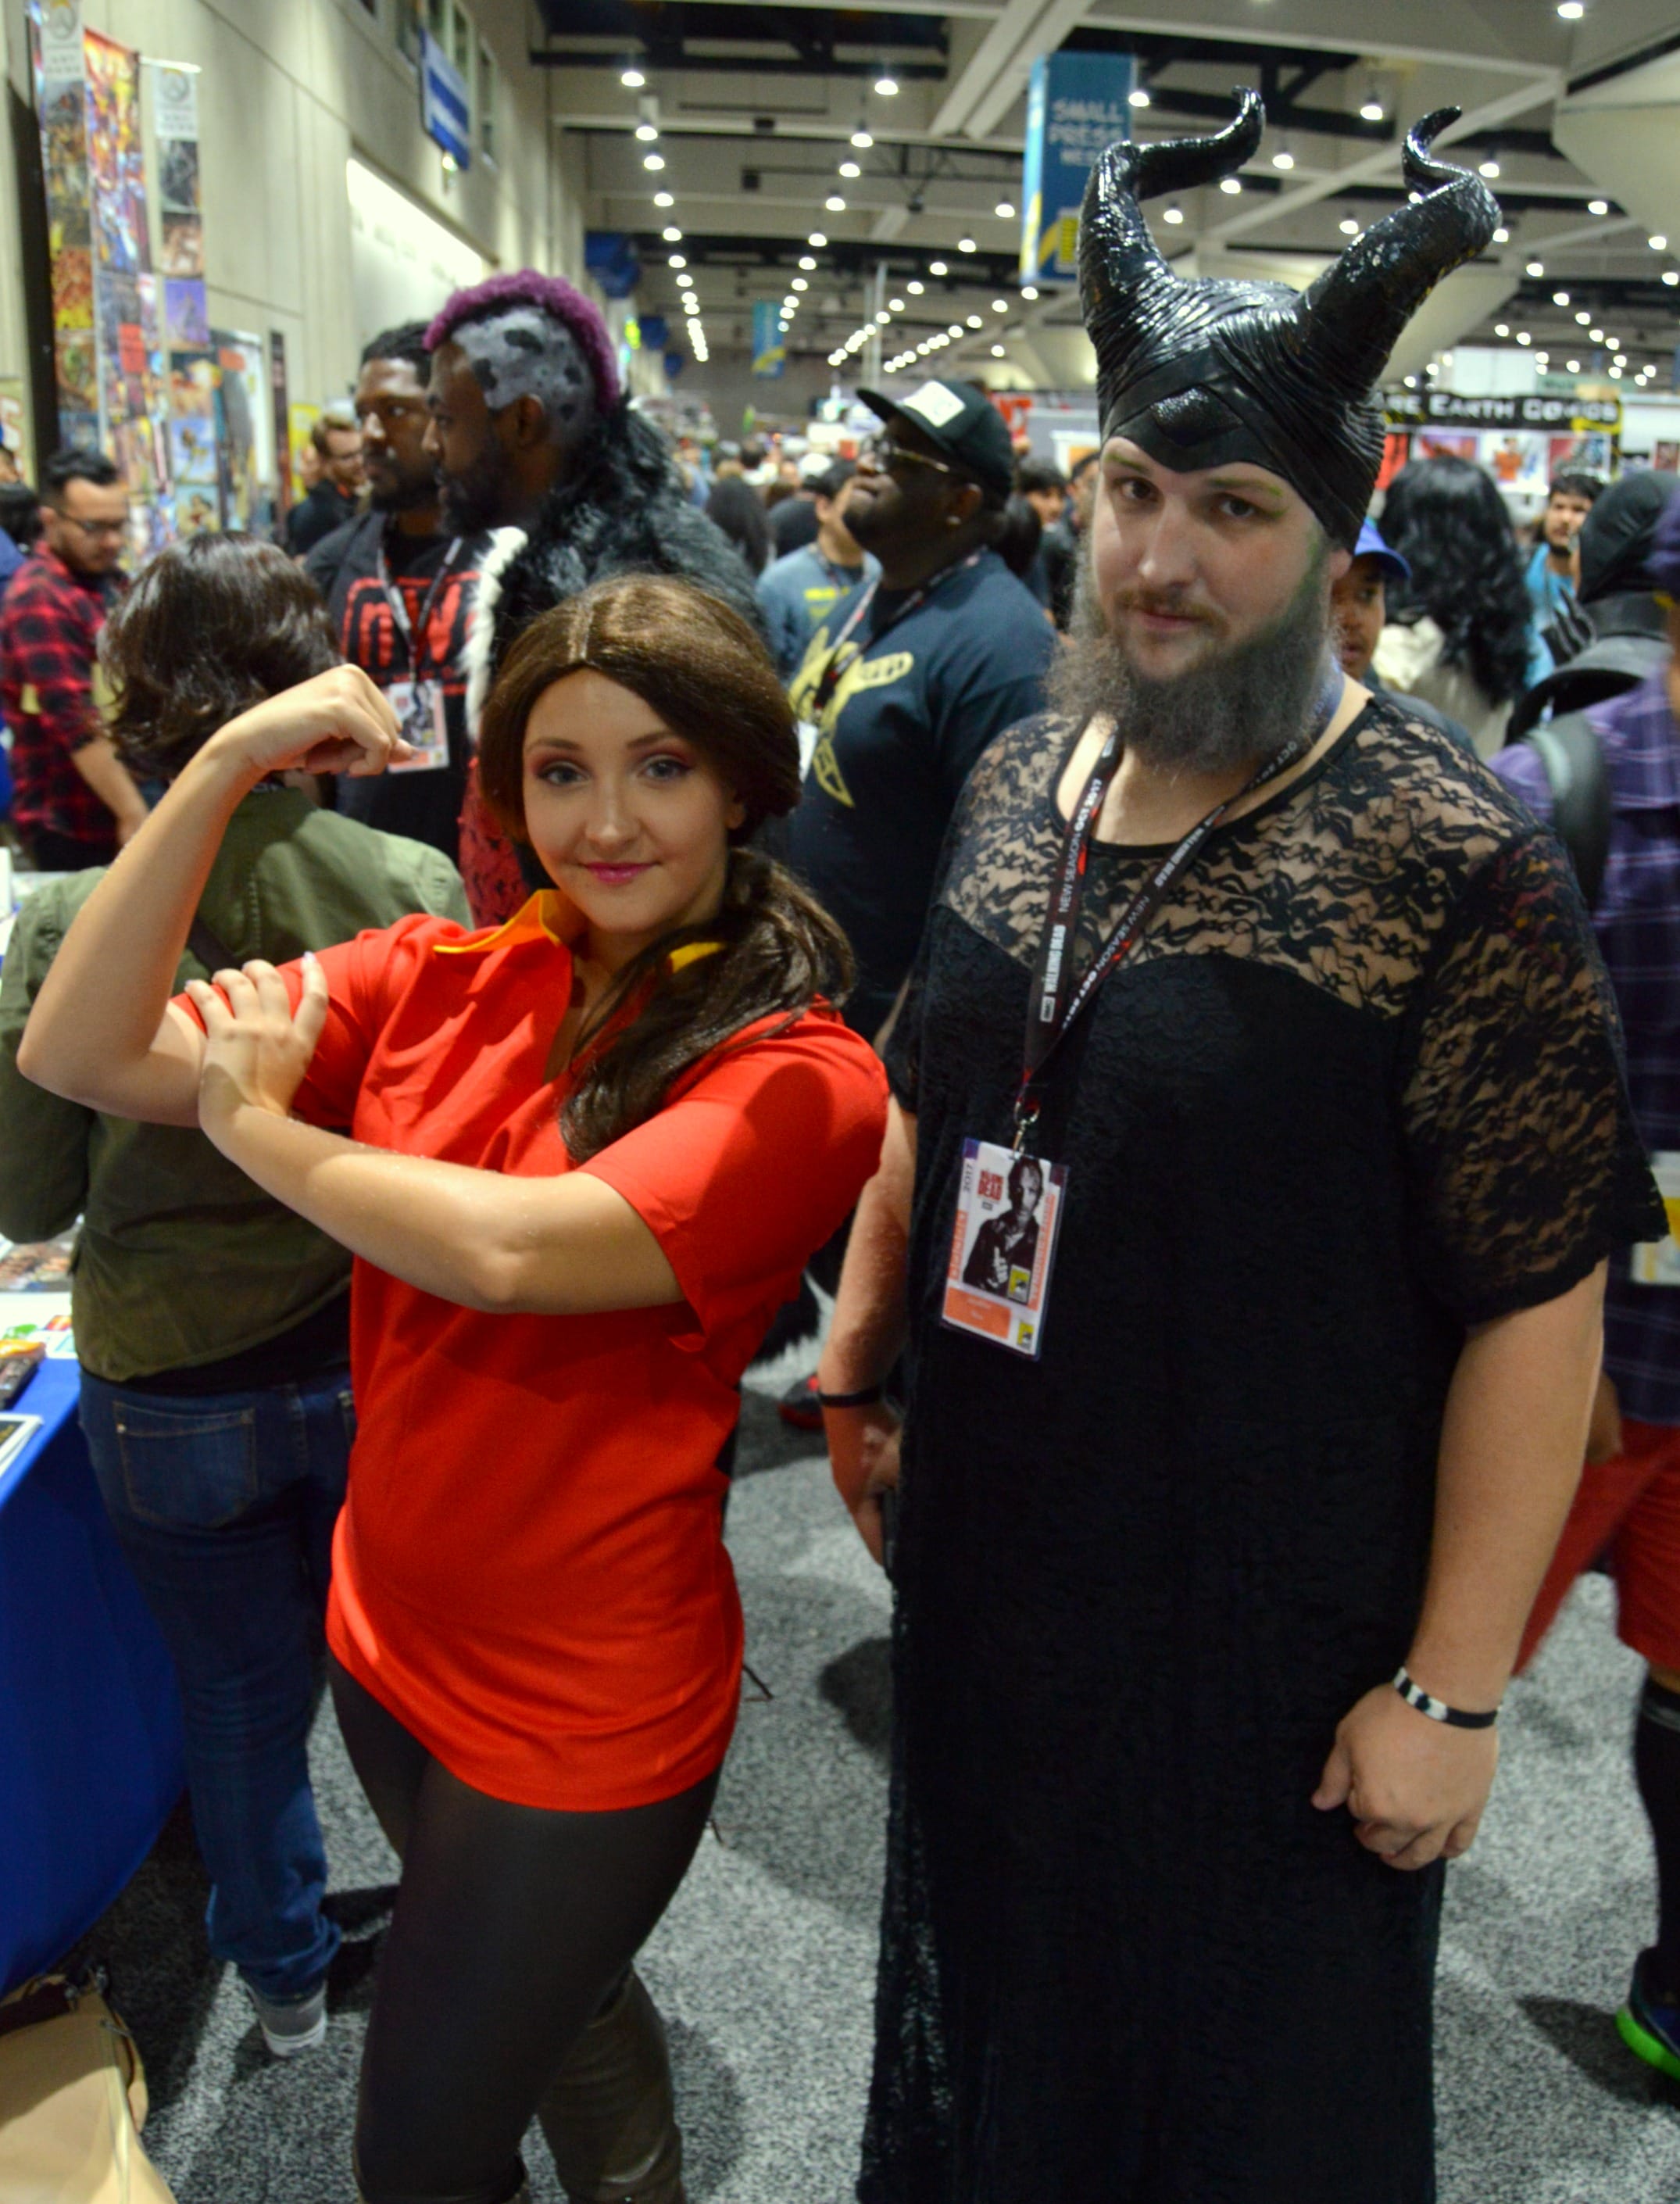 11 great genderswapped costumes spotted at the San Diego Comic Con